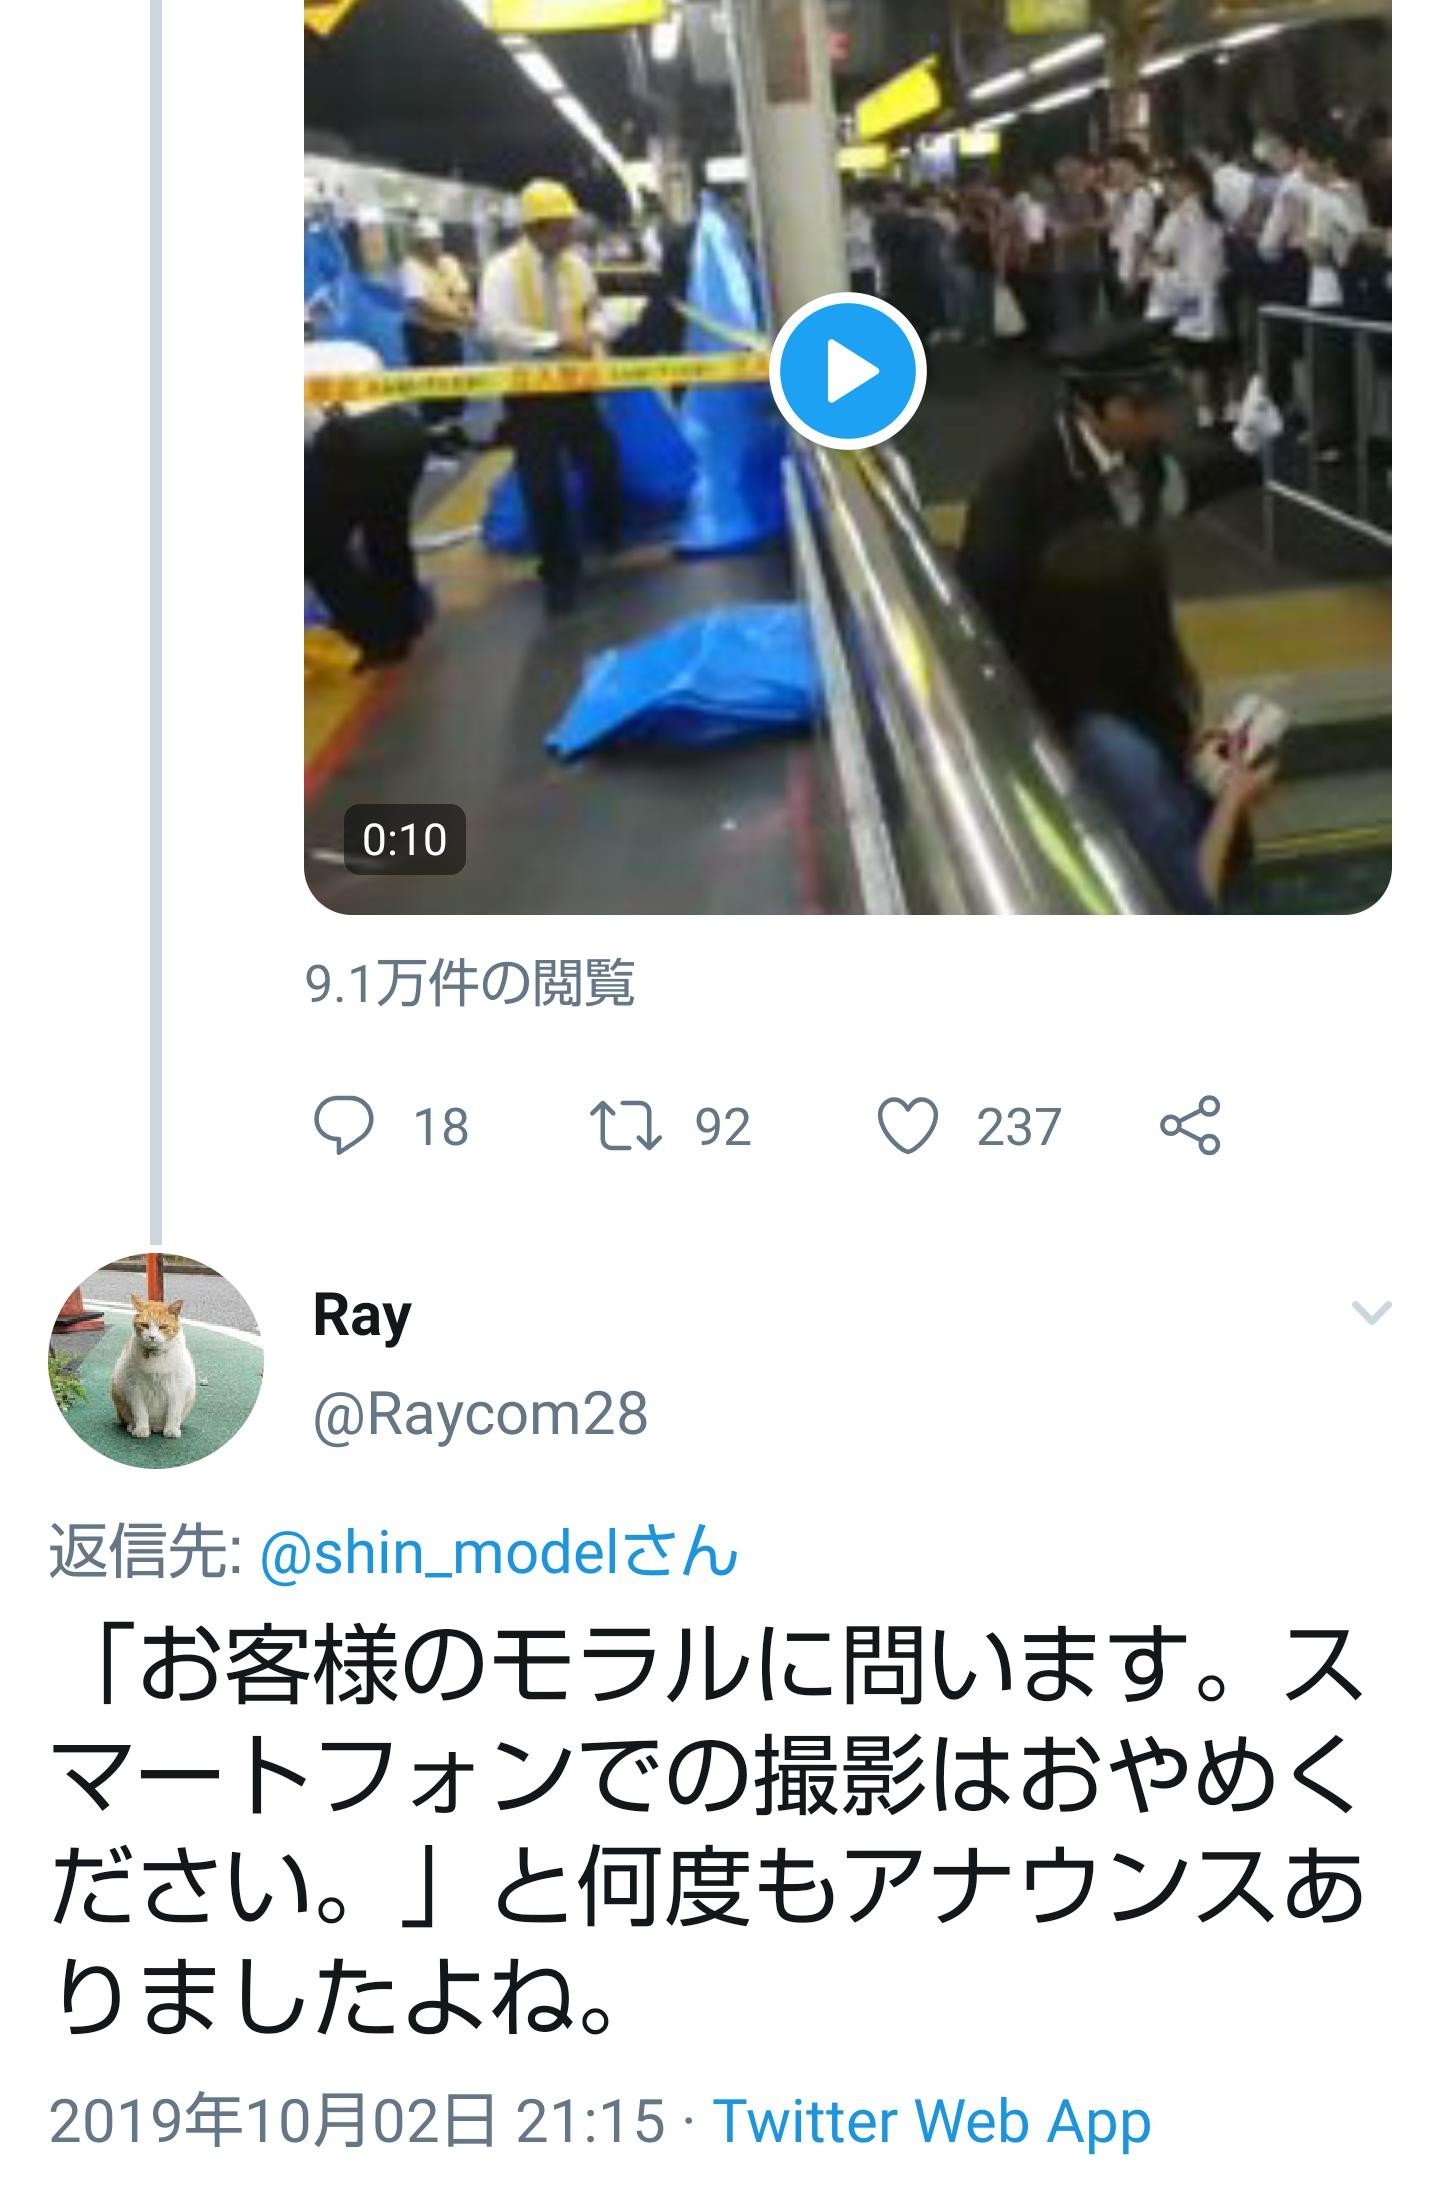 [Sad news] JR station staff rages at Noji horse gathering at the accident site, 